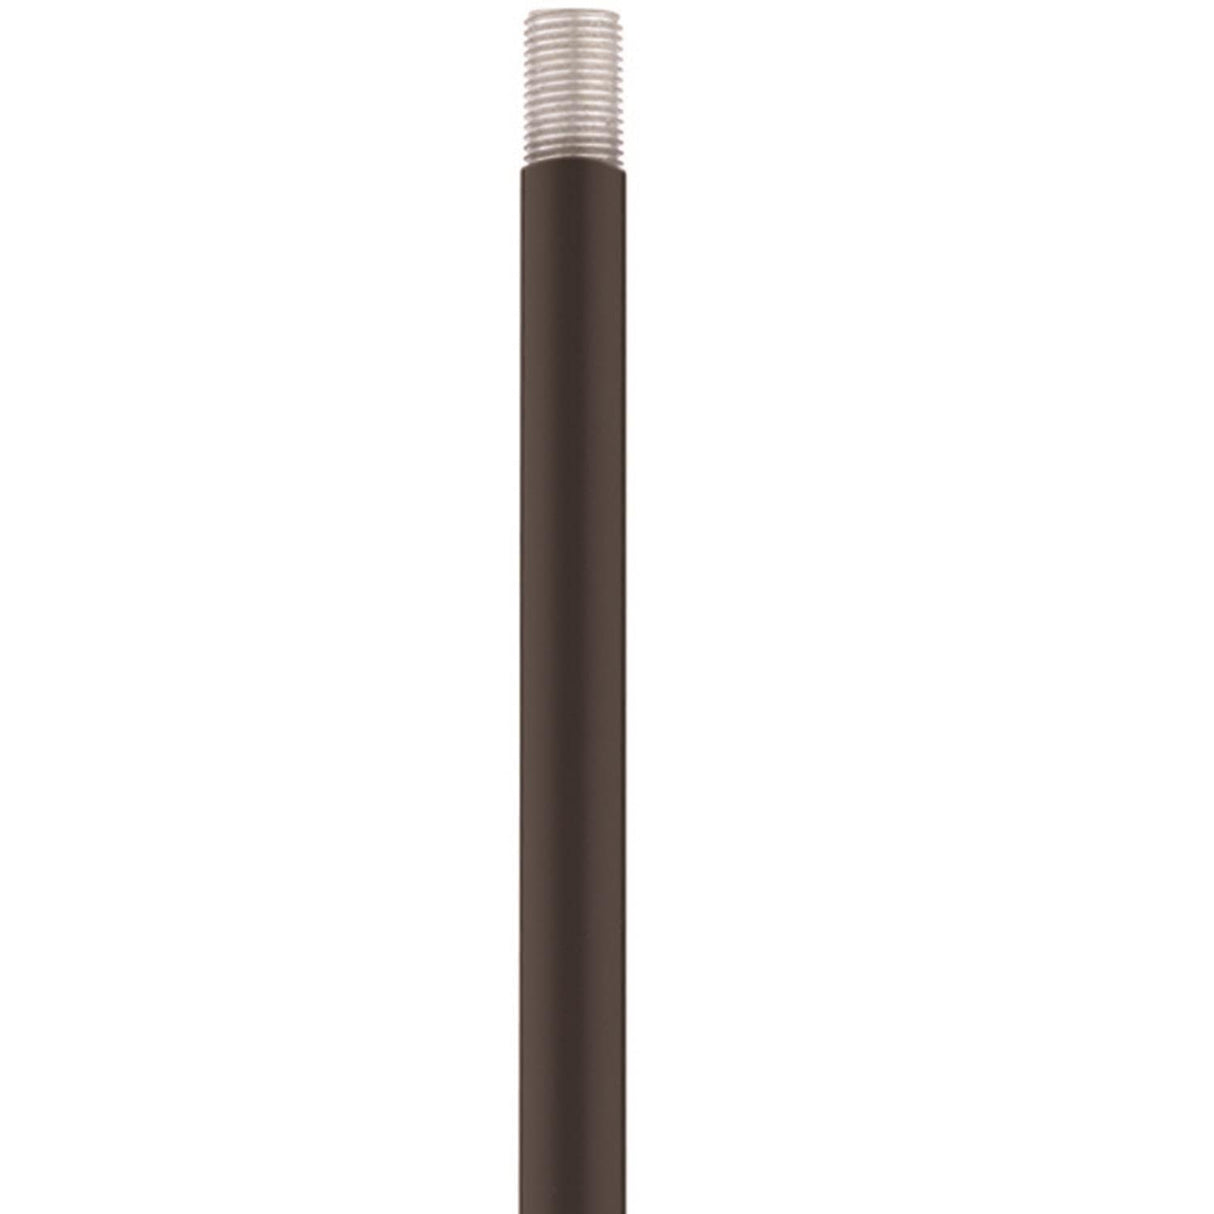 Livex Lighting 56050-07 Transitional Extension Stem from Accessories Collection in Bronze/Dark Finish, 12.00 inches